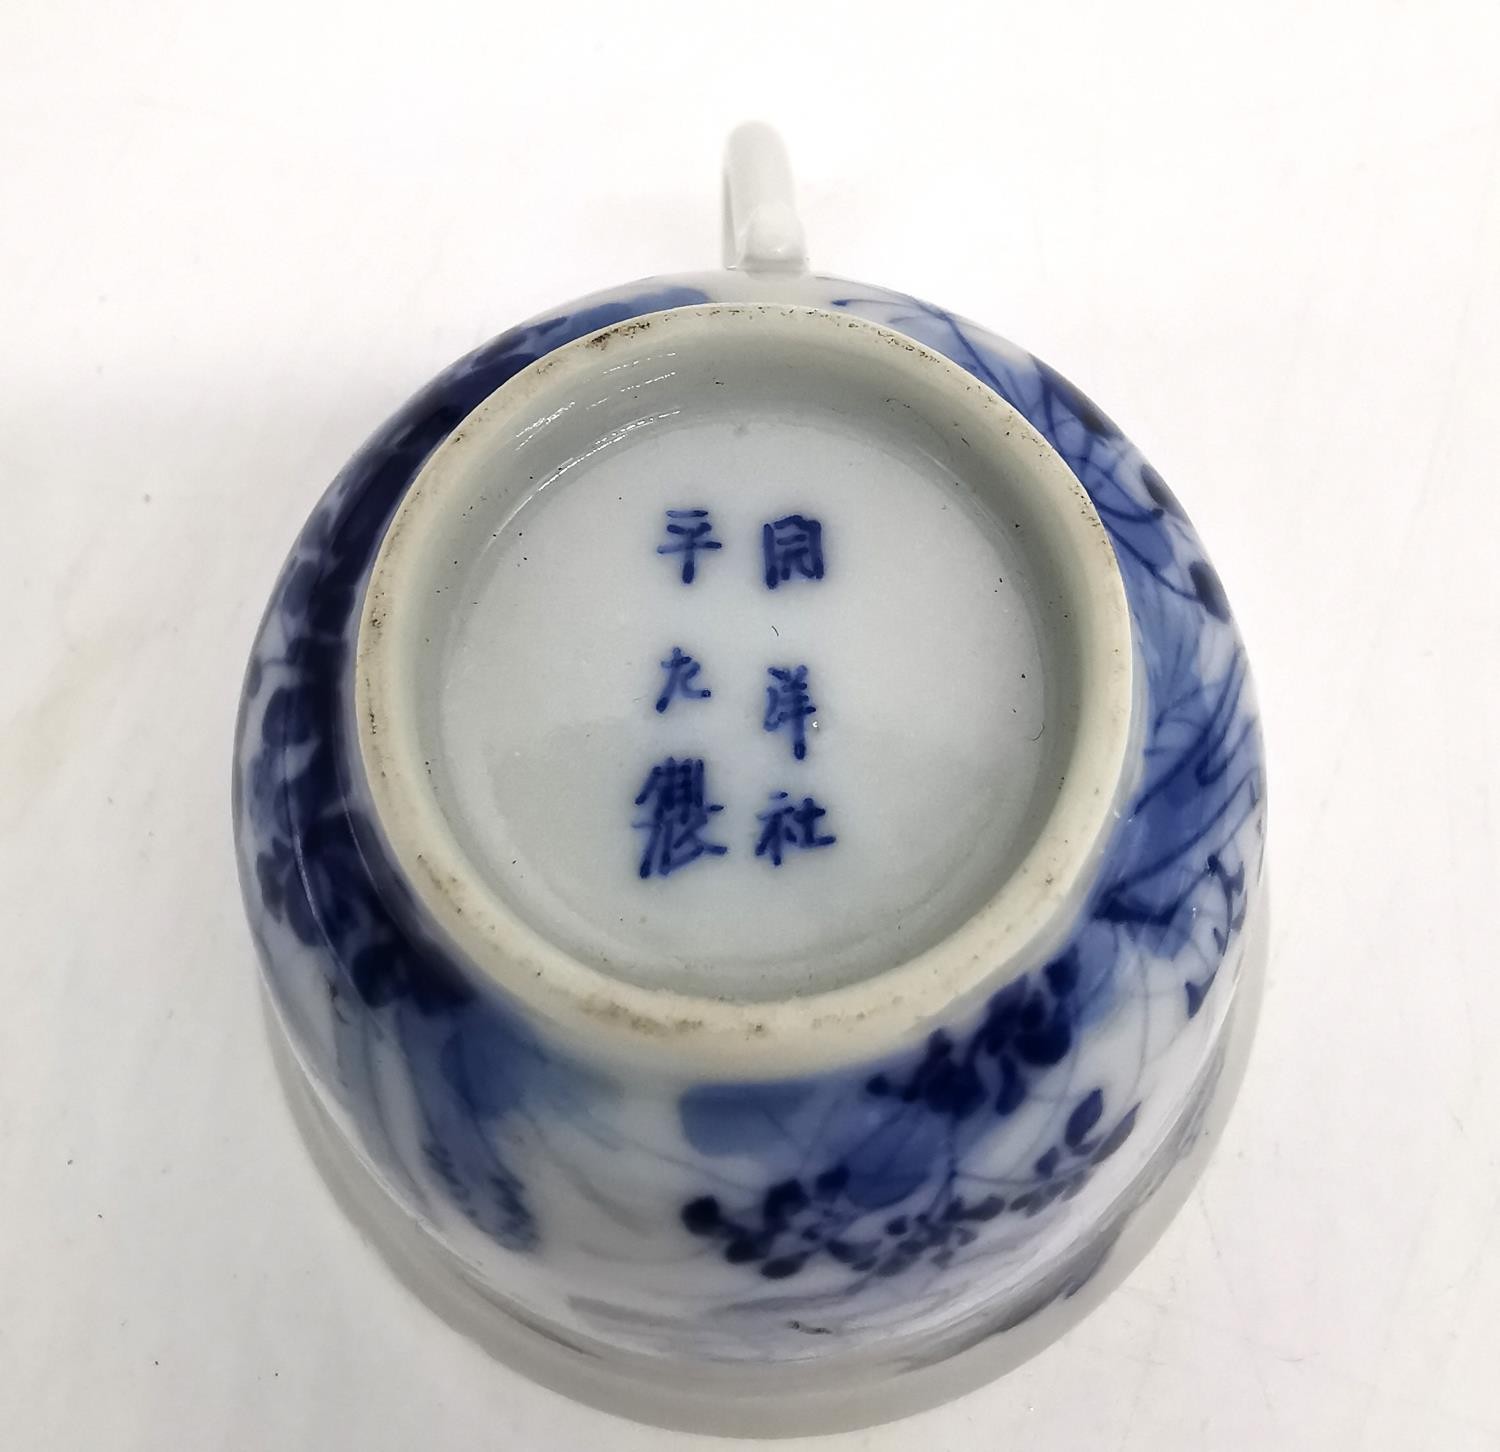 A Japanese 19th century hand painted porcelain small blue and white floral and foliate design teacup - Image 3 of 9